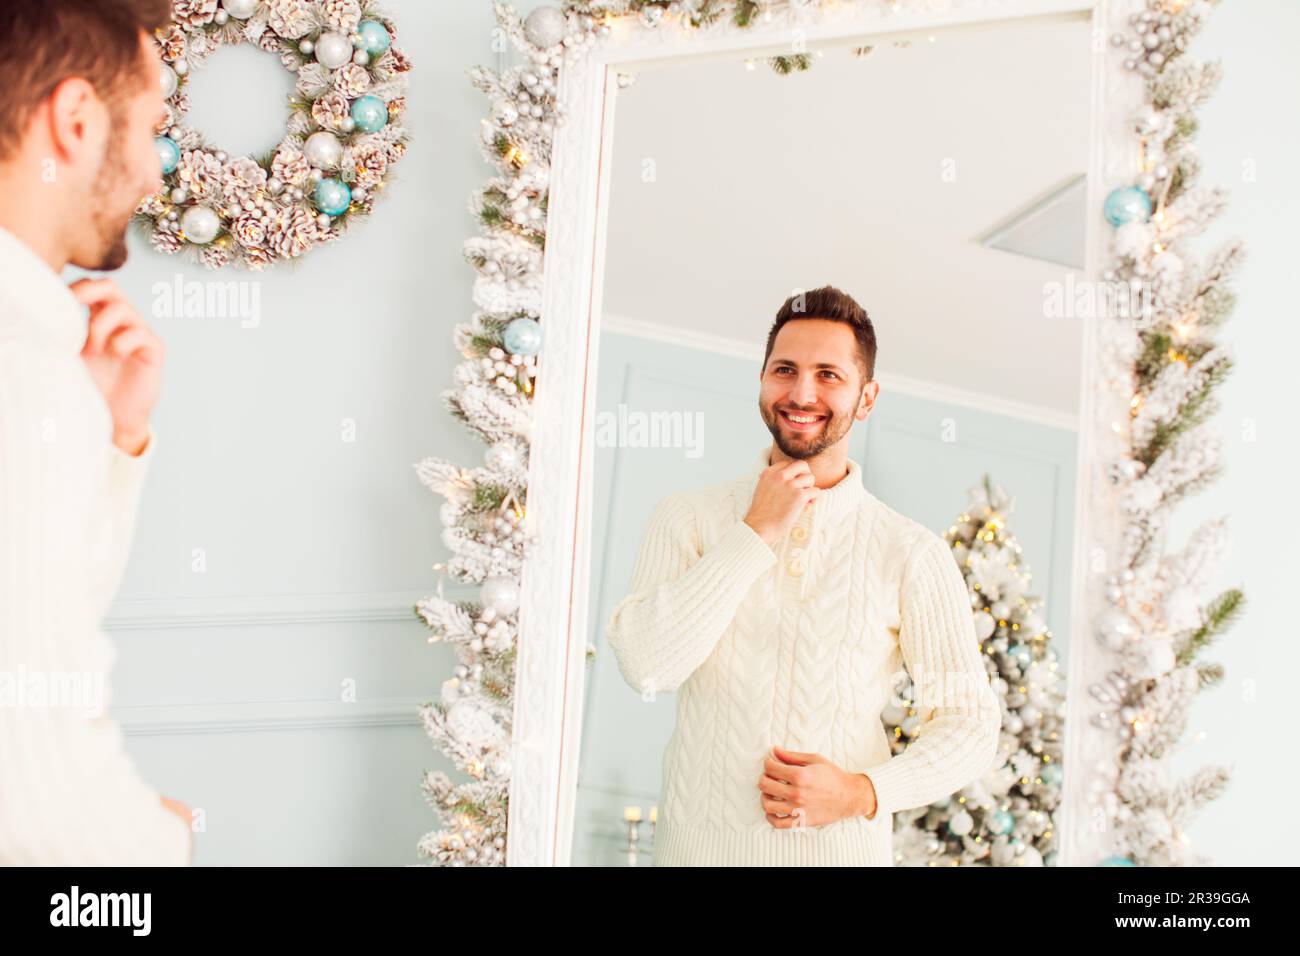 Portrait of young man near large mirror Stock Photo